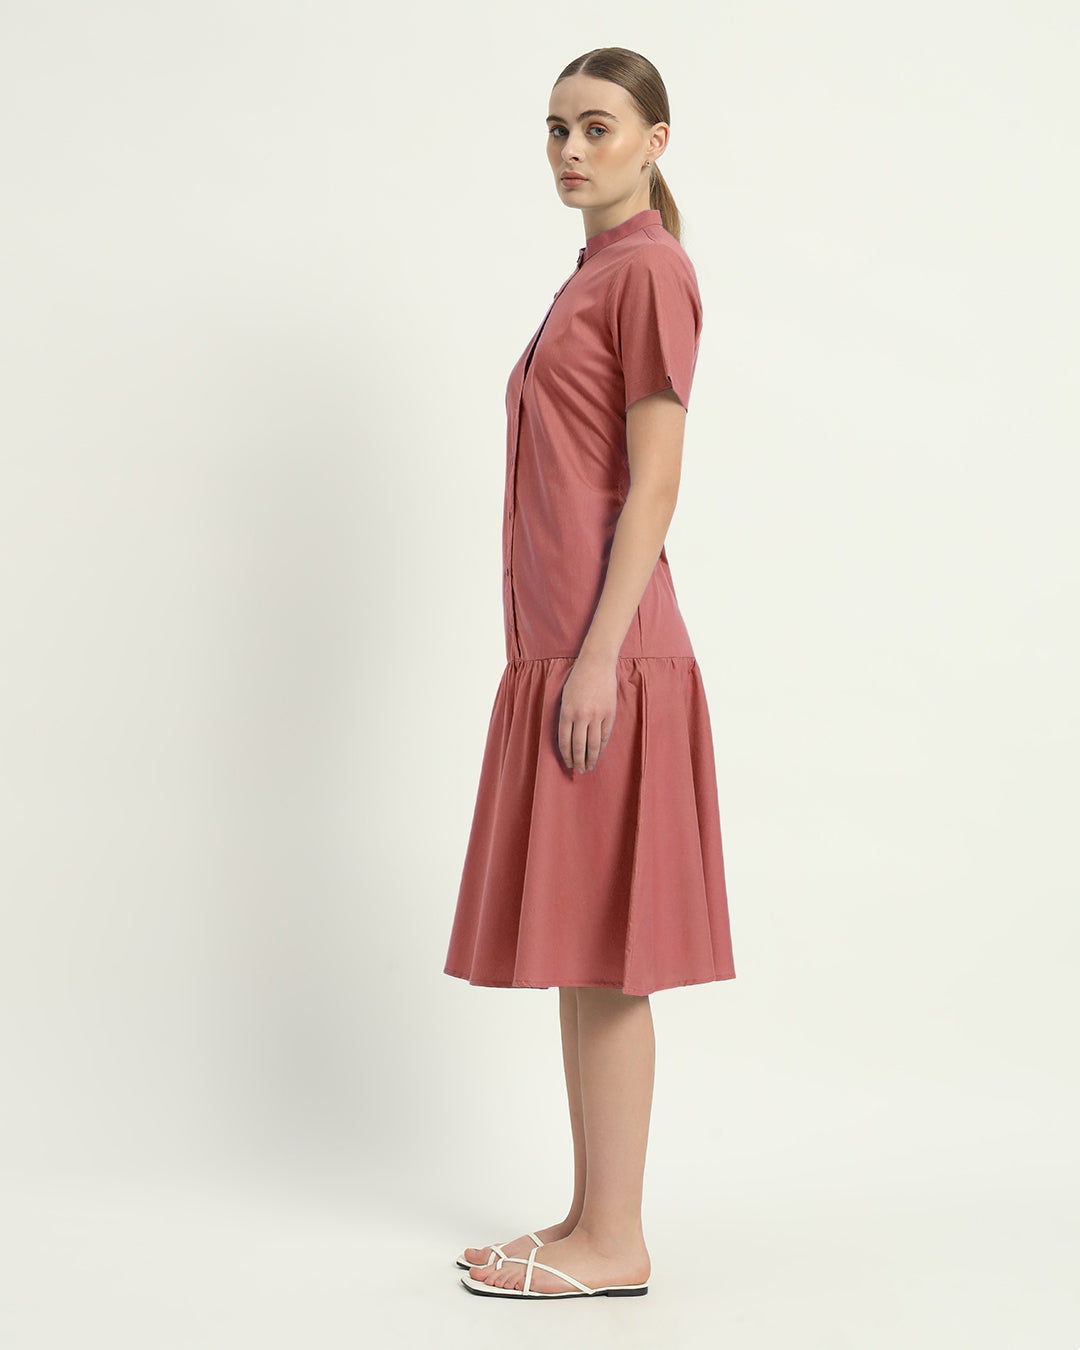 The Ivory Pink Melrose Cotton Dress